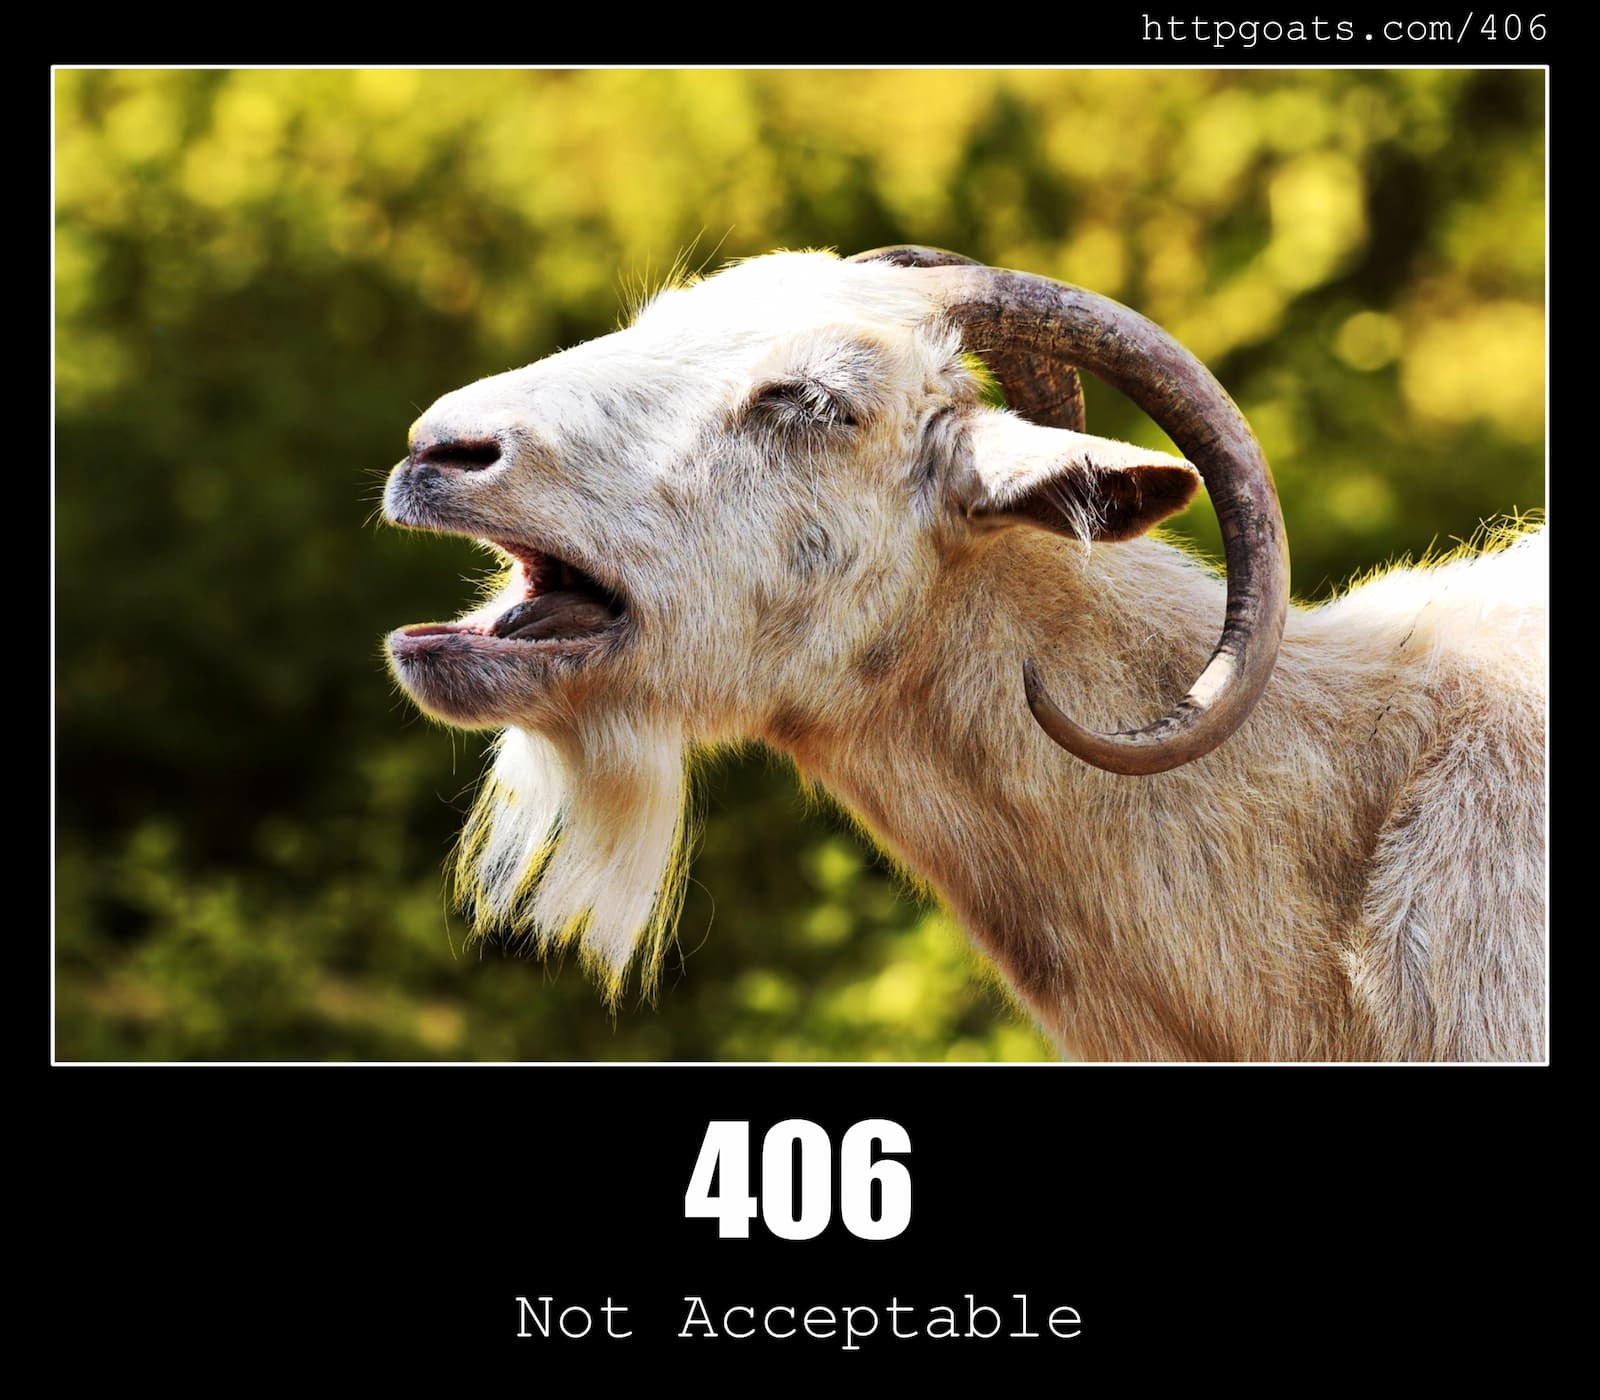 HTTP Status Code 406 Not Acceptable & Goats